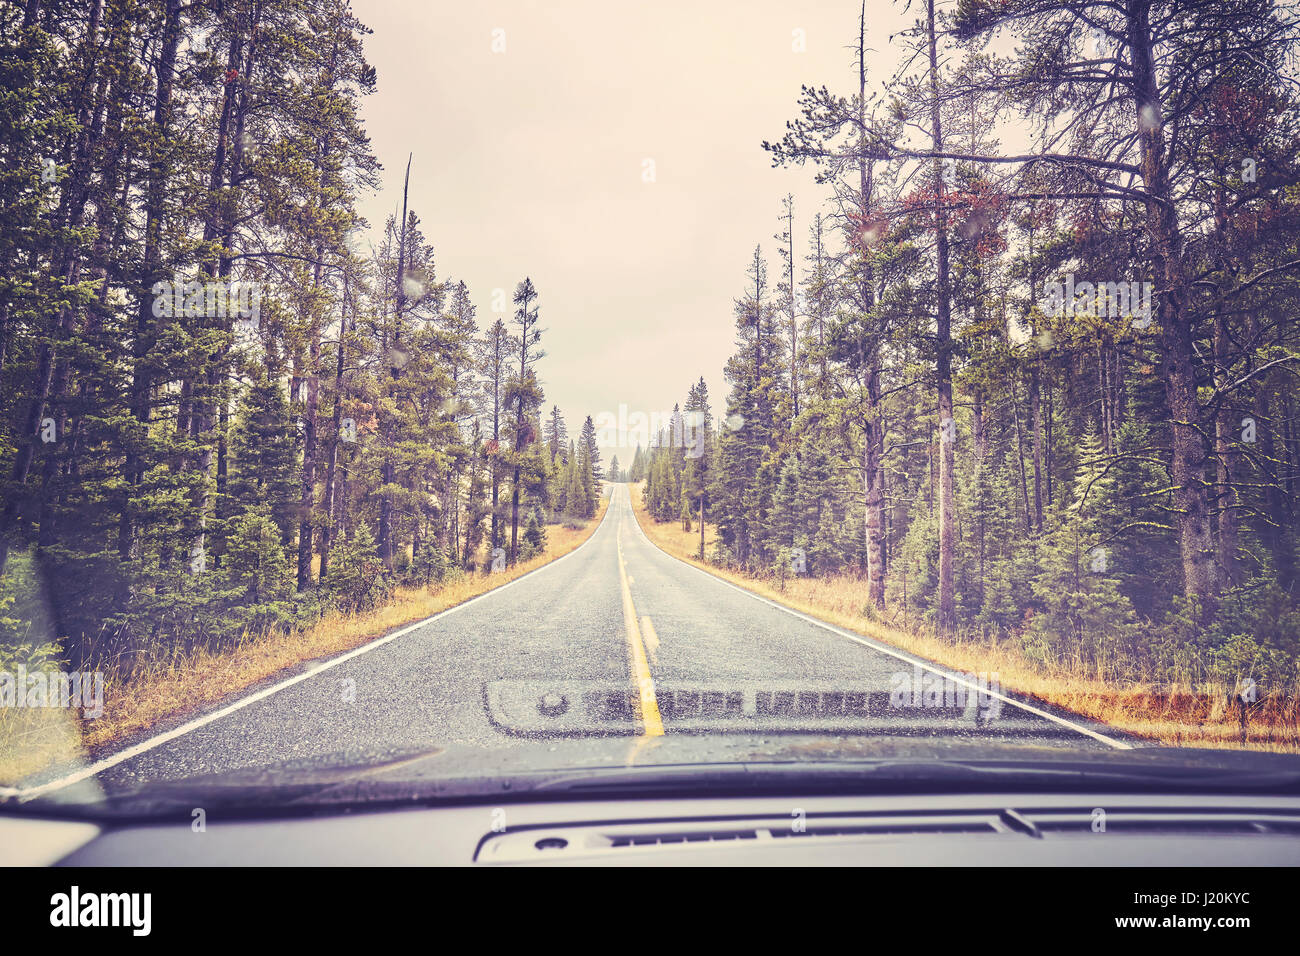 Driving in the rain, picture taken through the windshield, color toning applied, Yellowstone National Park, Wyoming, USA. Stock Photo